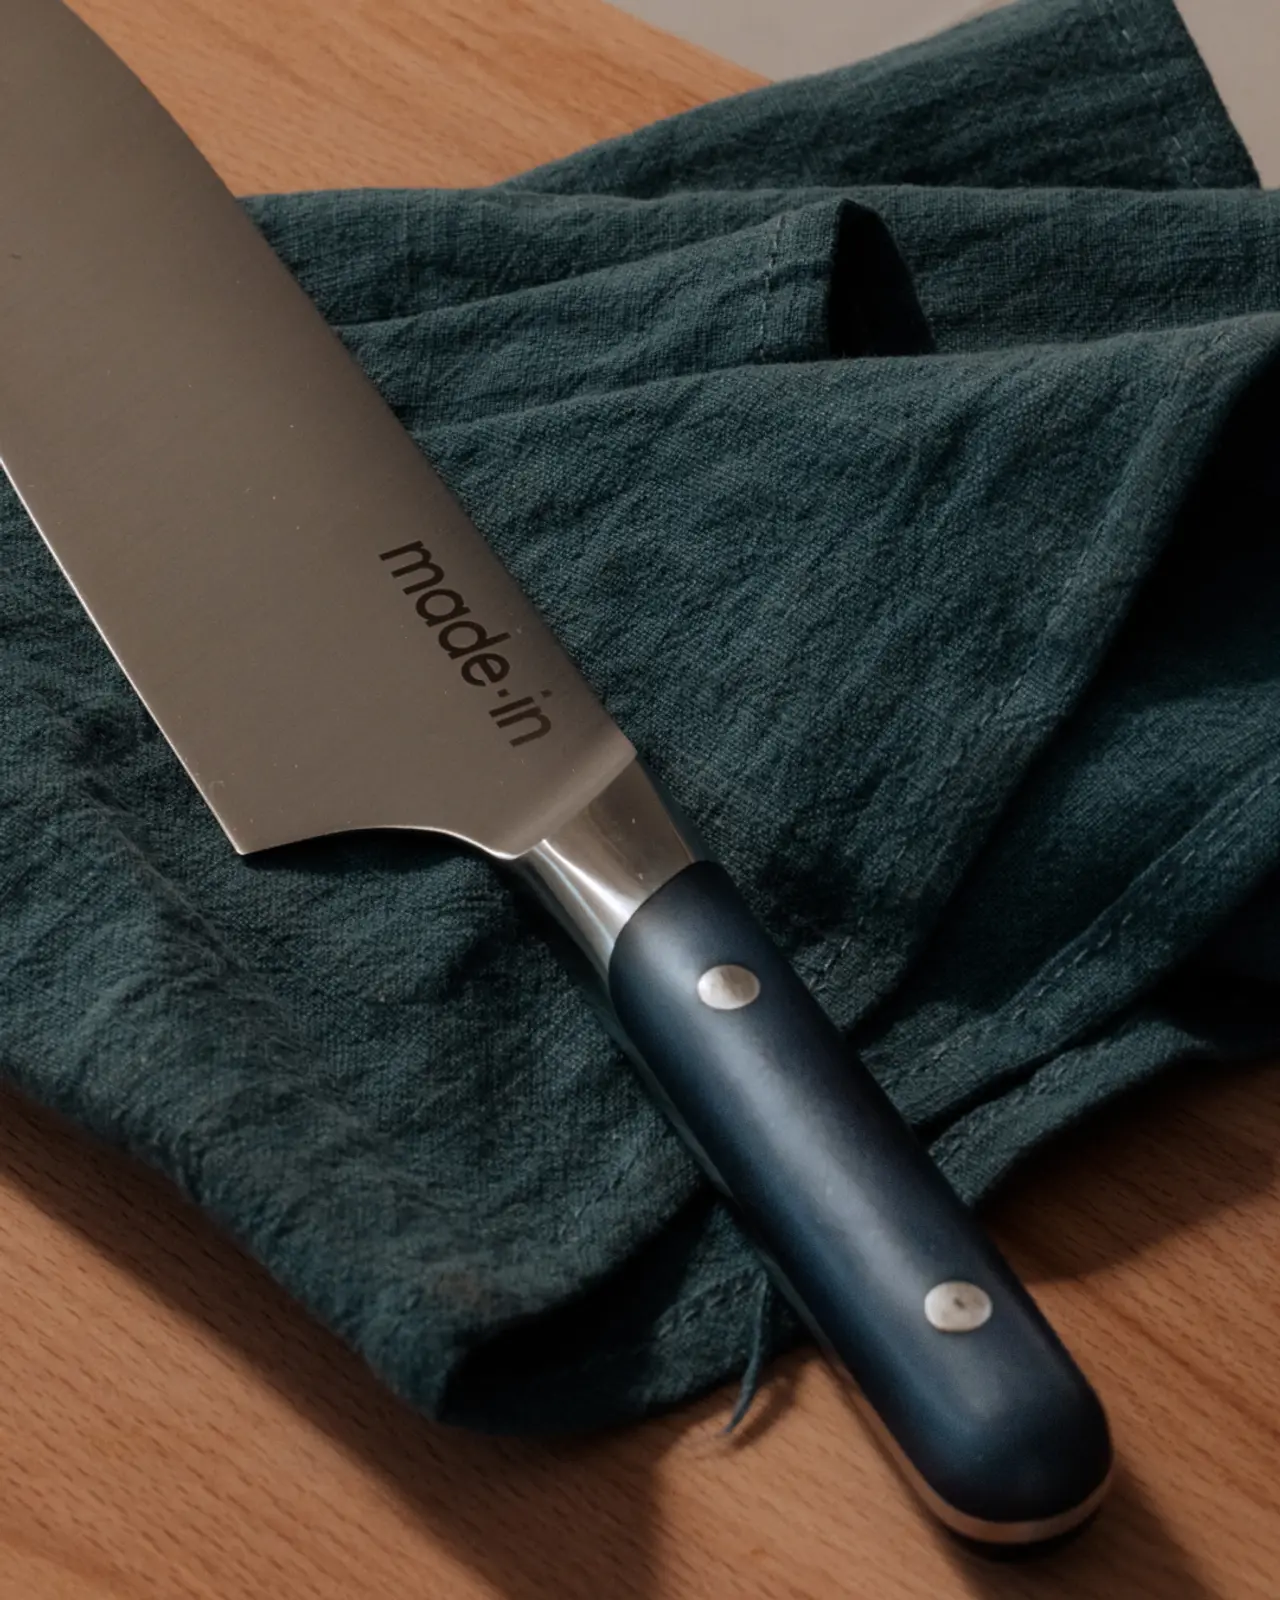 A close-up view of a chef's knife with a black handle laying on a crumpled dark green cloth.